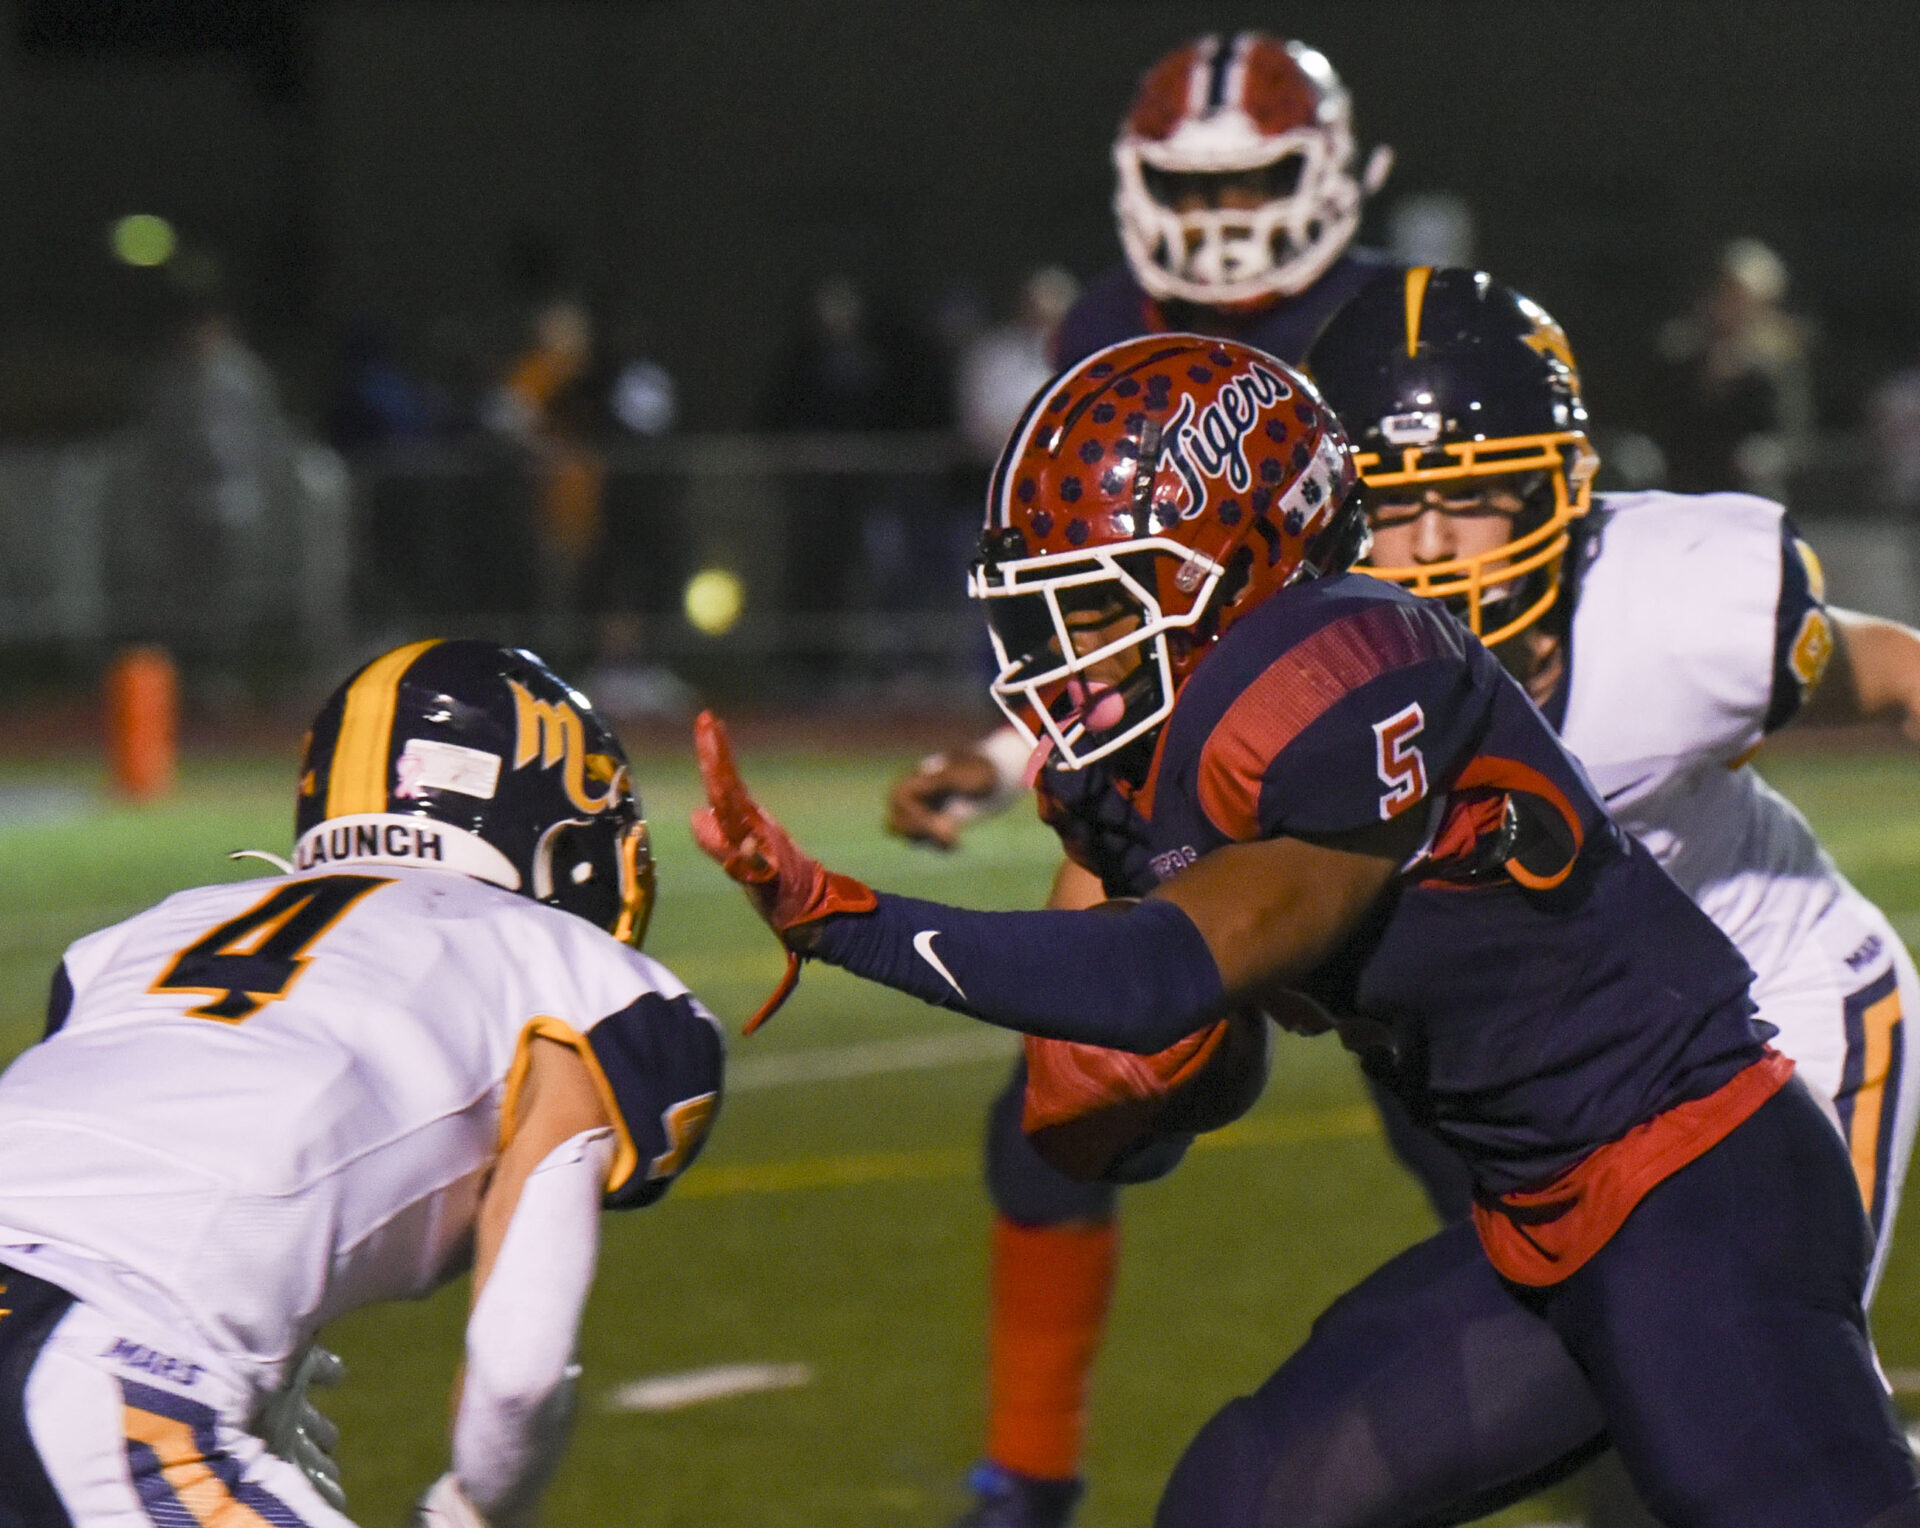 First look at Week 2 of the WPIAL football playoffs Pittsburgh Union